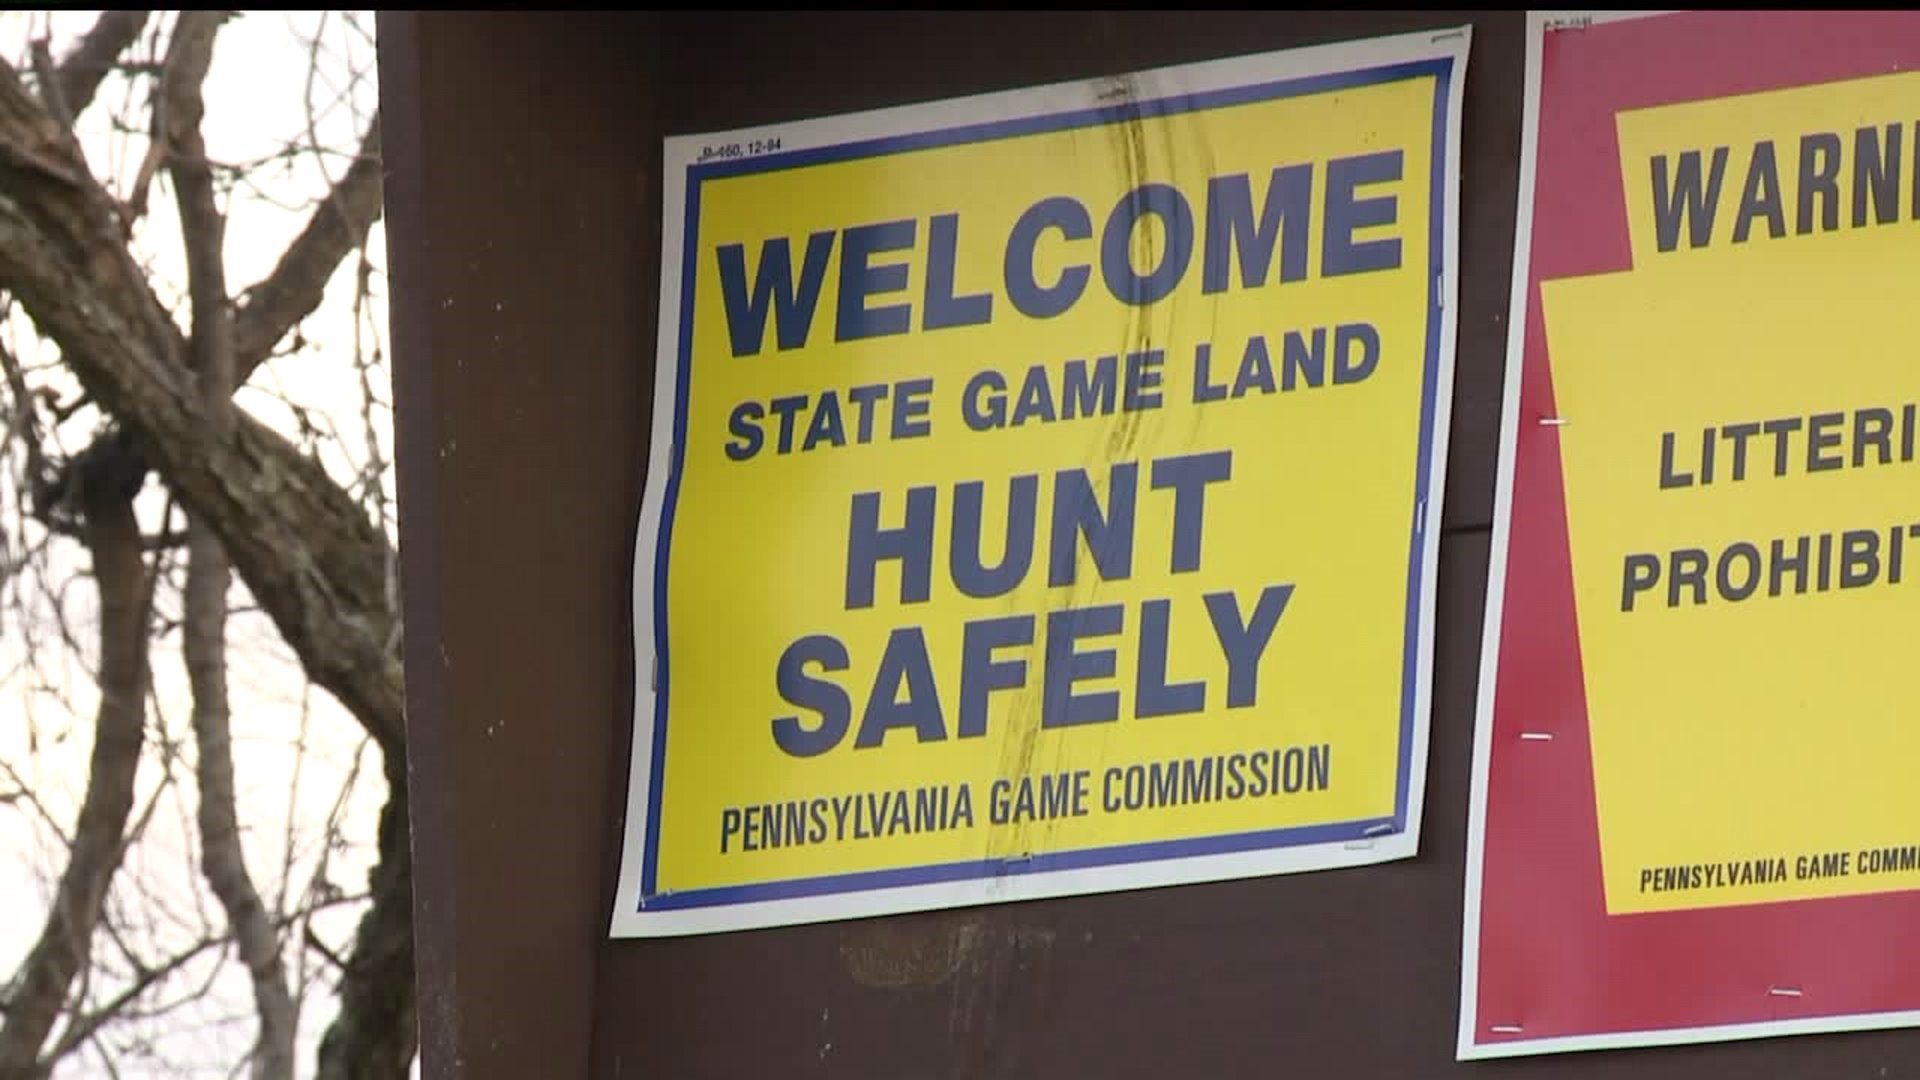 Sunday hunting could soon be legal in PA